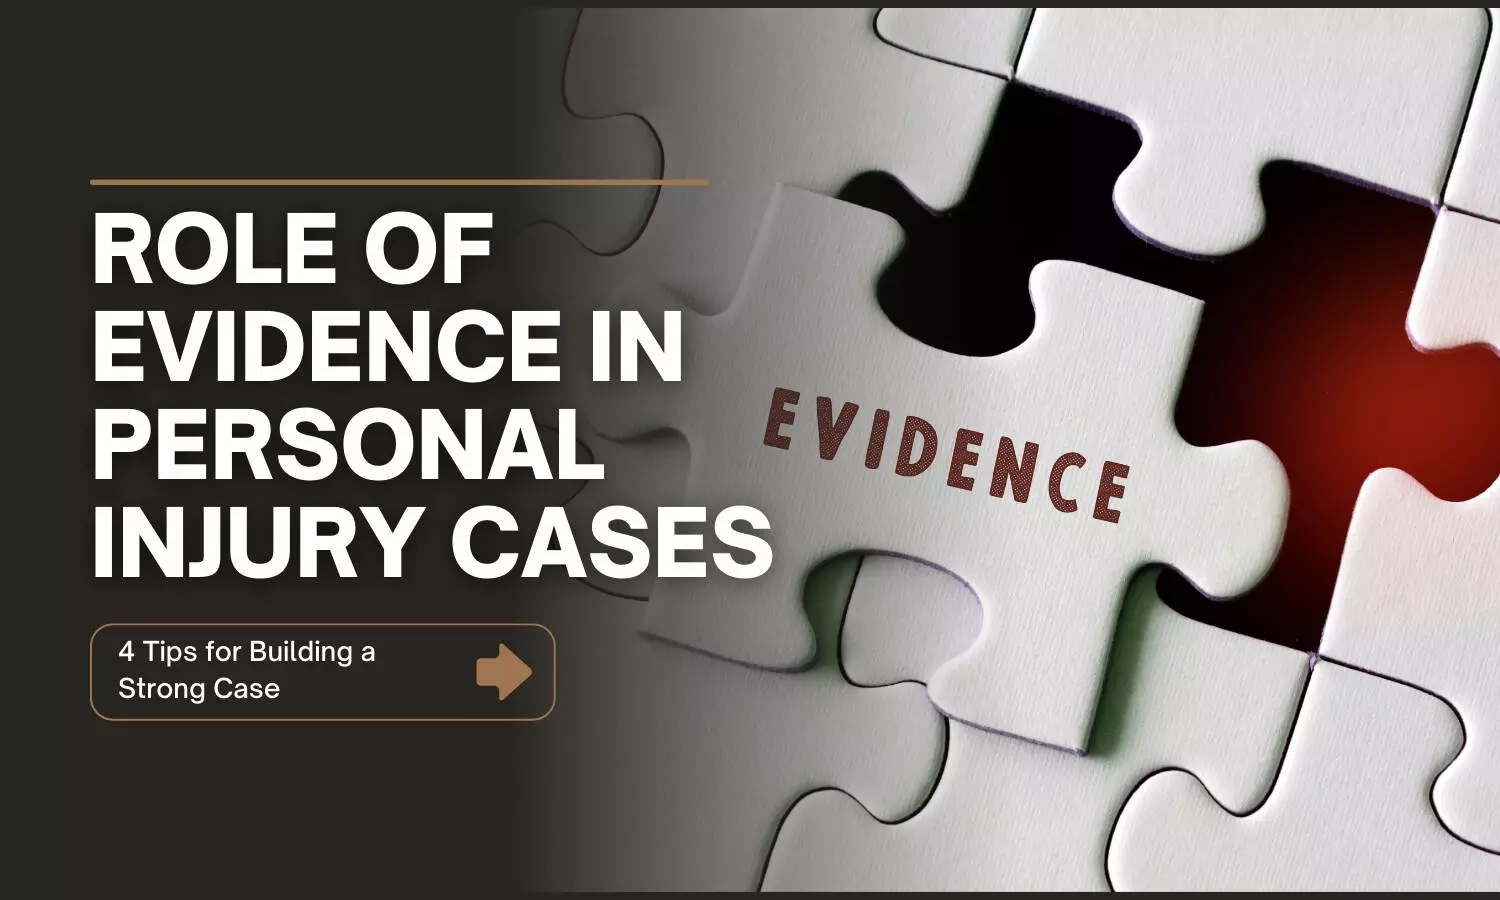 Role of Evidence in Personal Injury Cases: 4 Tips for Building a Strong Case